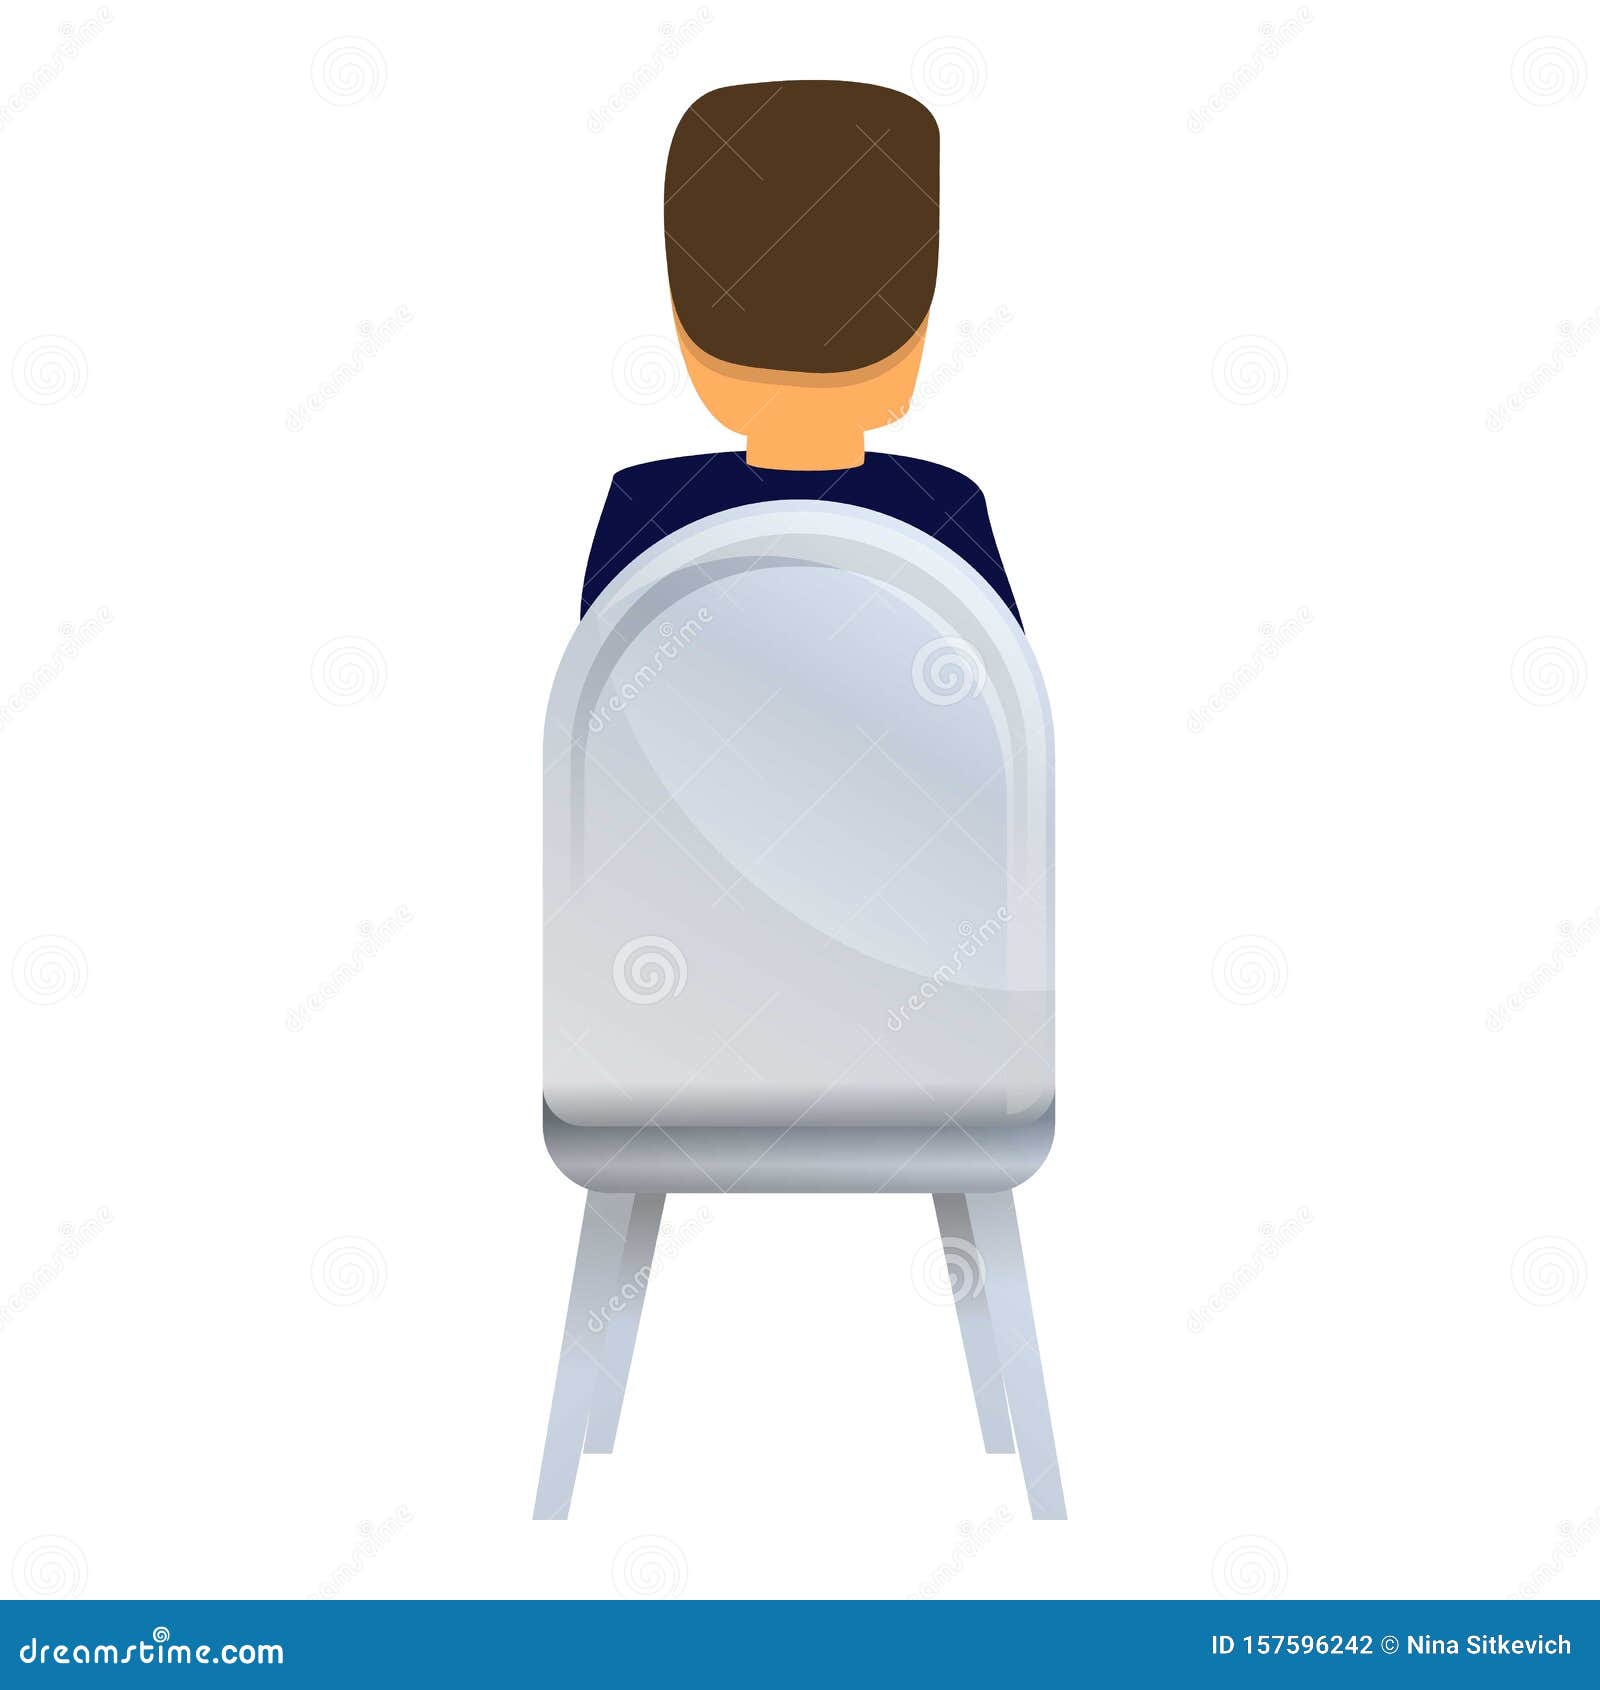 Back View Man On Chair Icon Cartoon Style Stock Vector Illustration